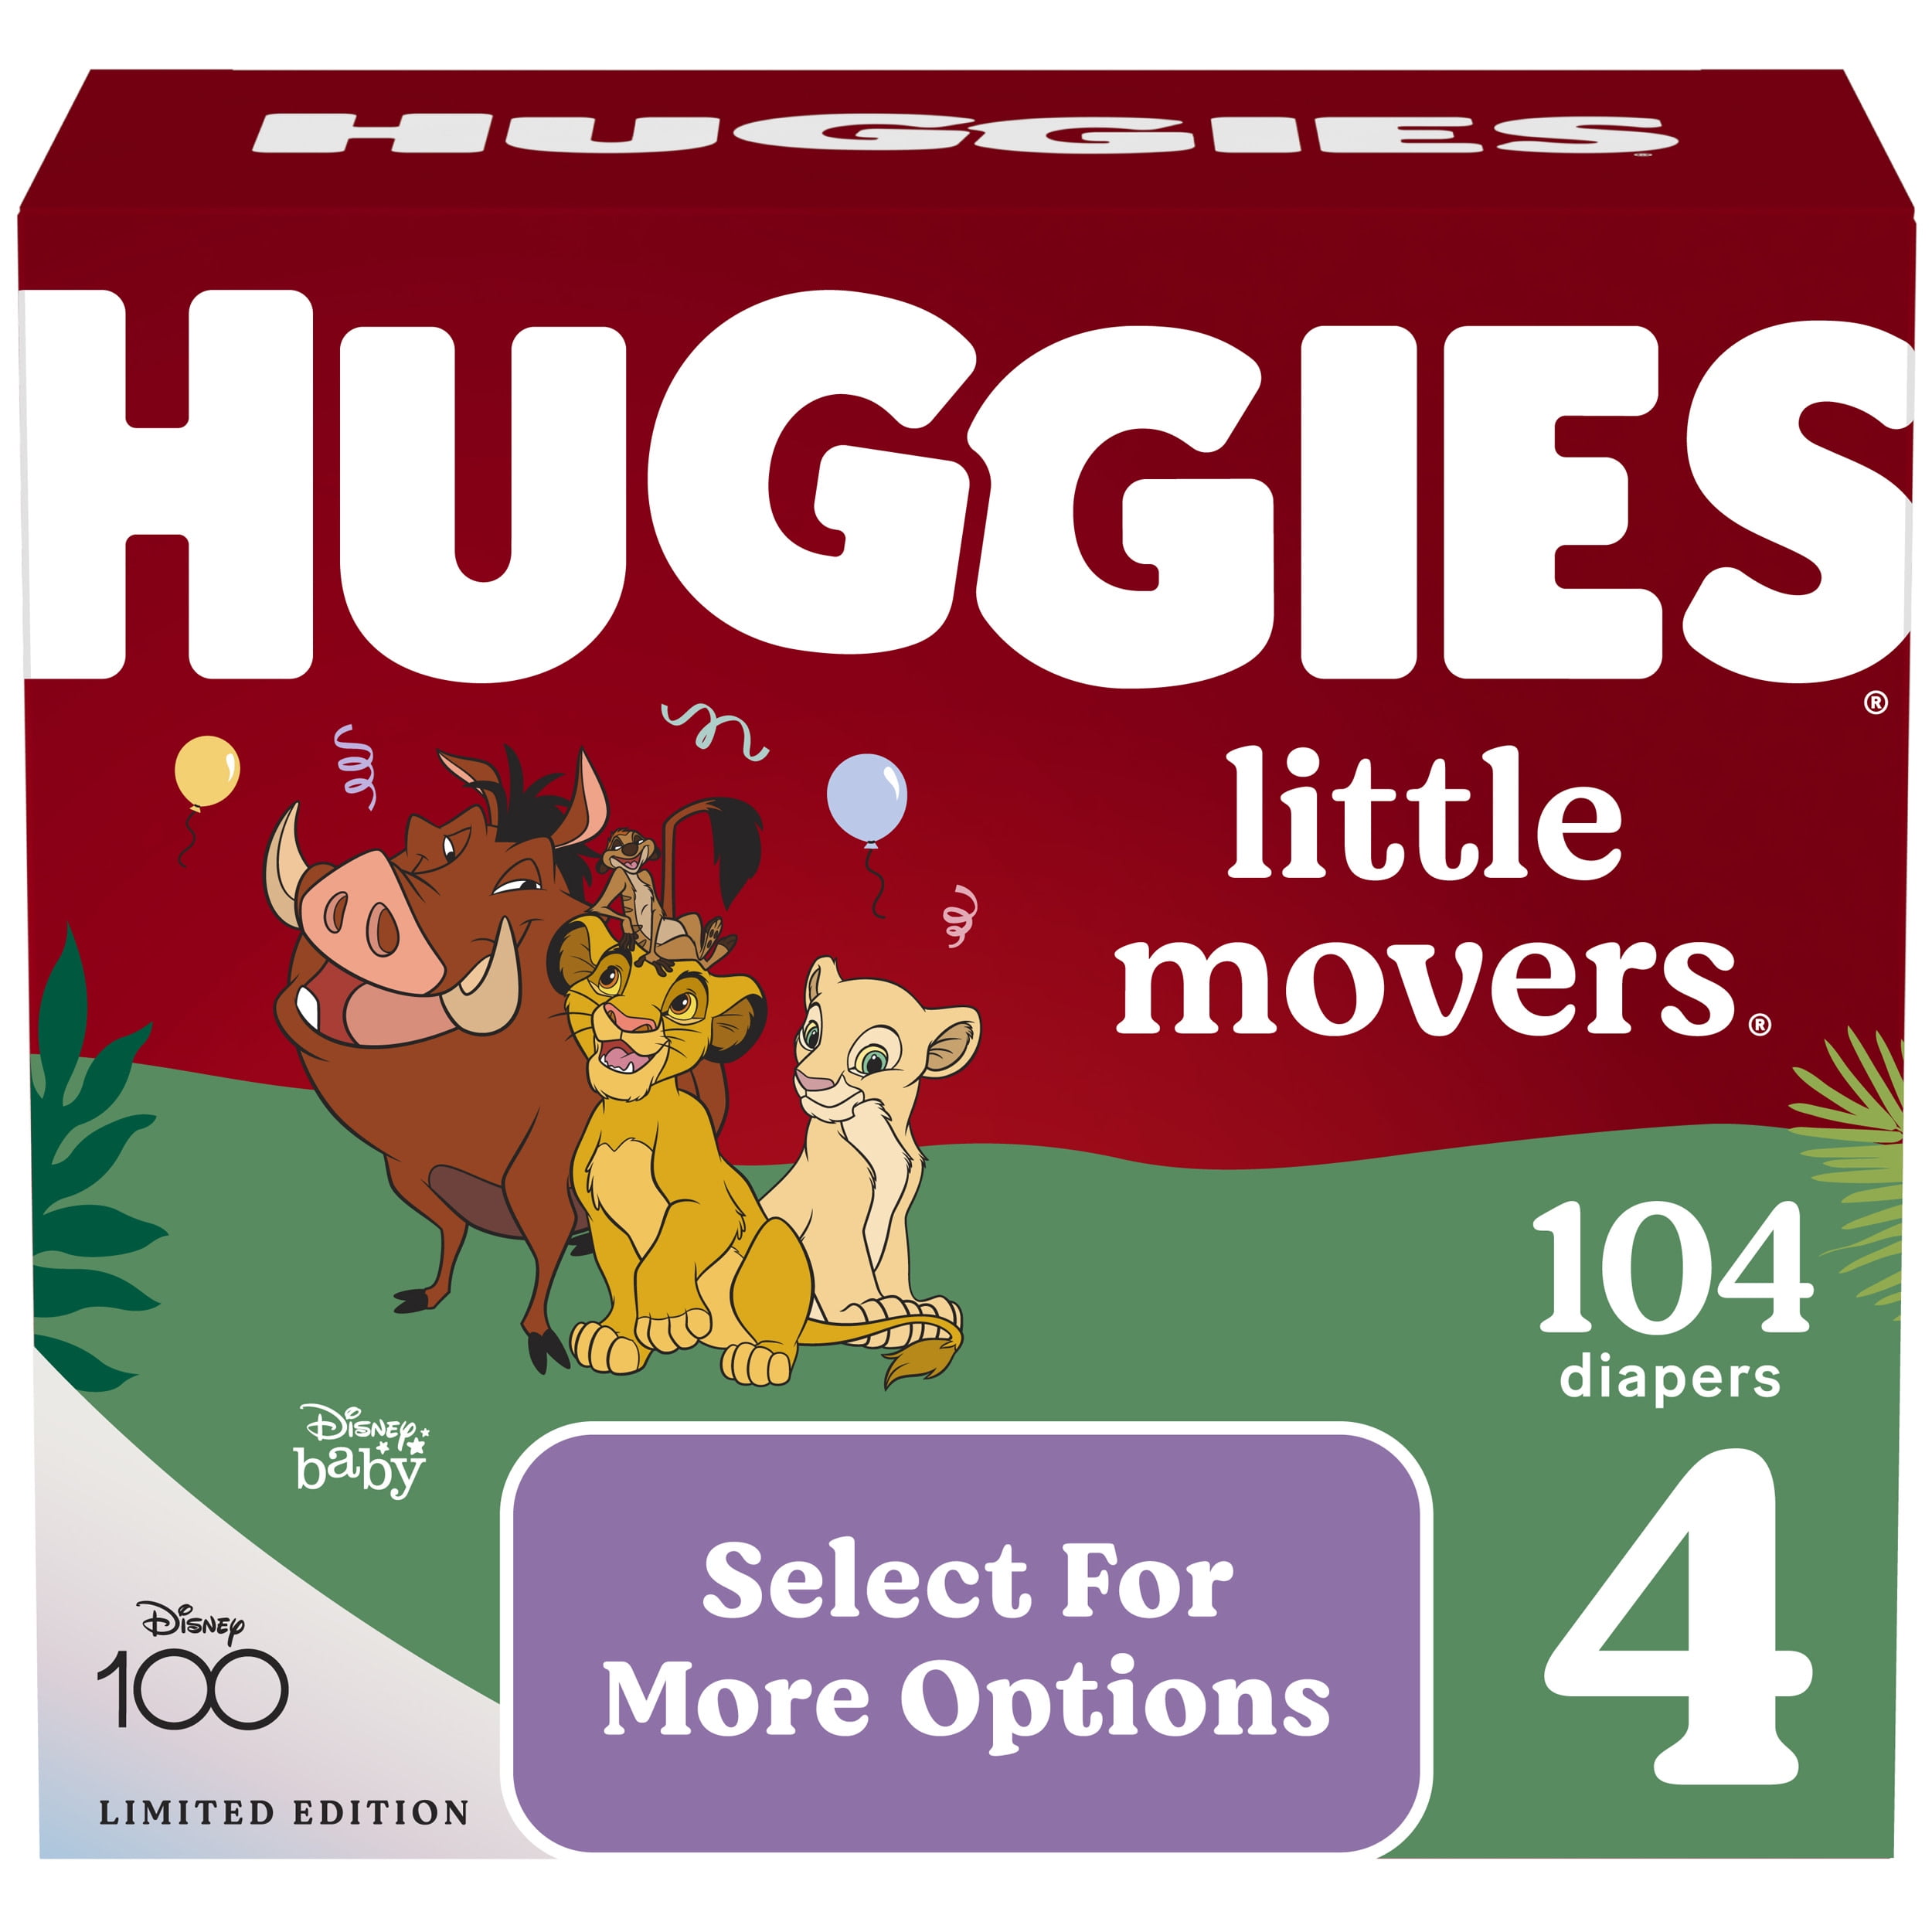 Huggies Overnites Nighttime Baby Diapers - Size 6